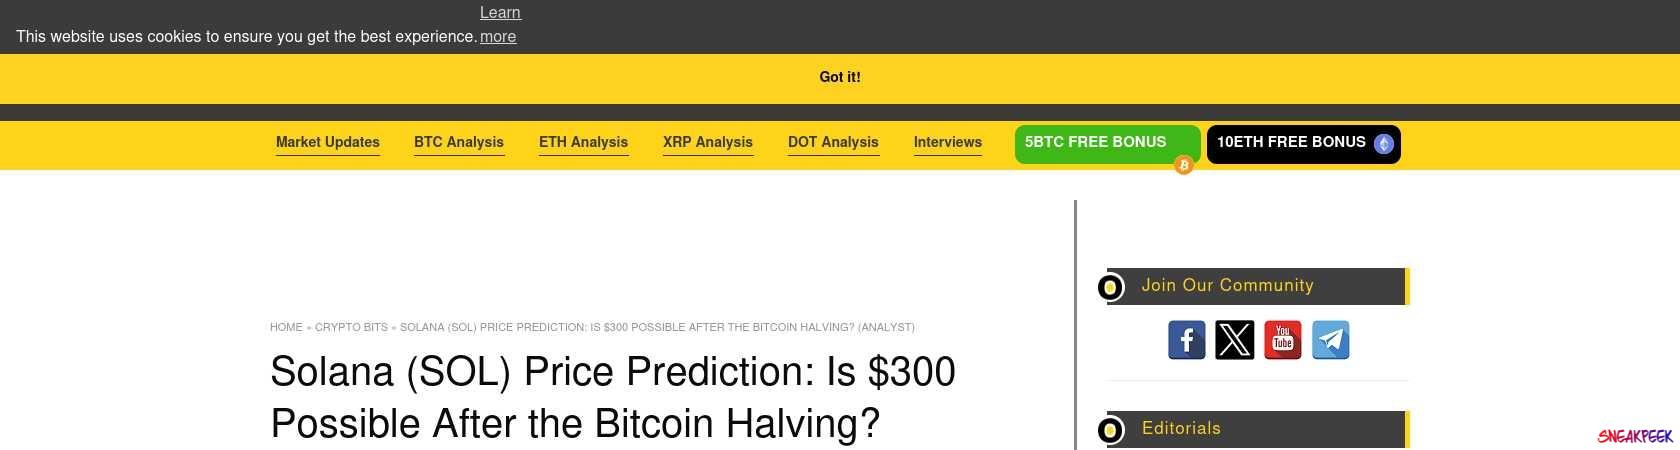 Read the full Article:  ⭲ Solana (SOL) Price Prediction: Is $300 Possible After the Bitcoin Halving? (Analyst)